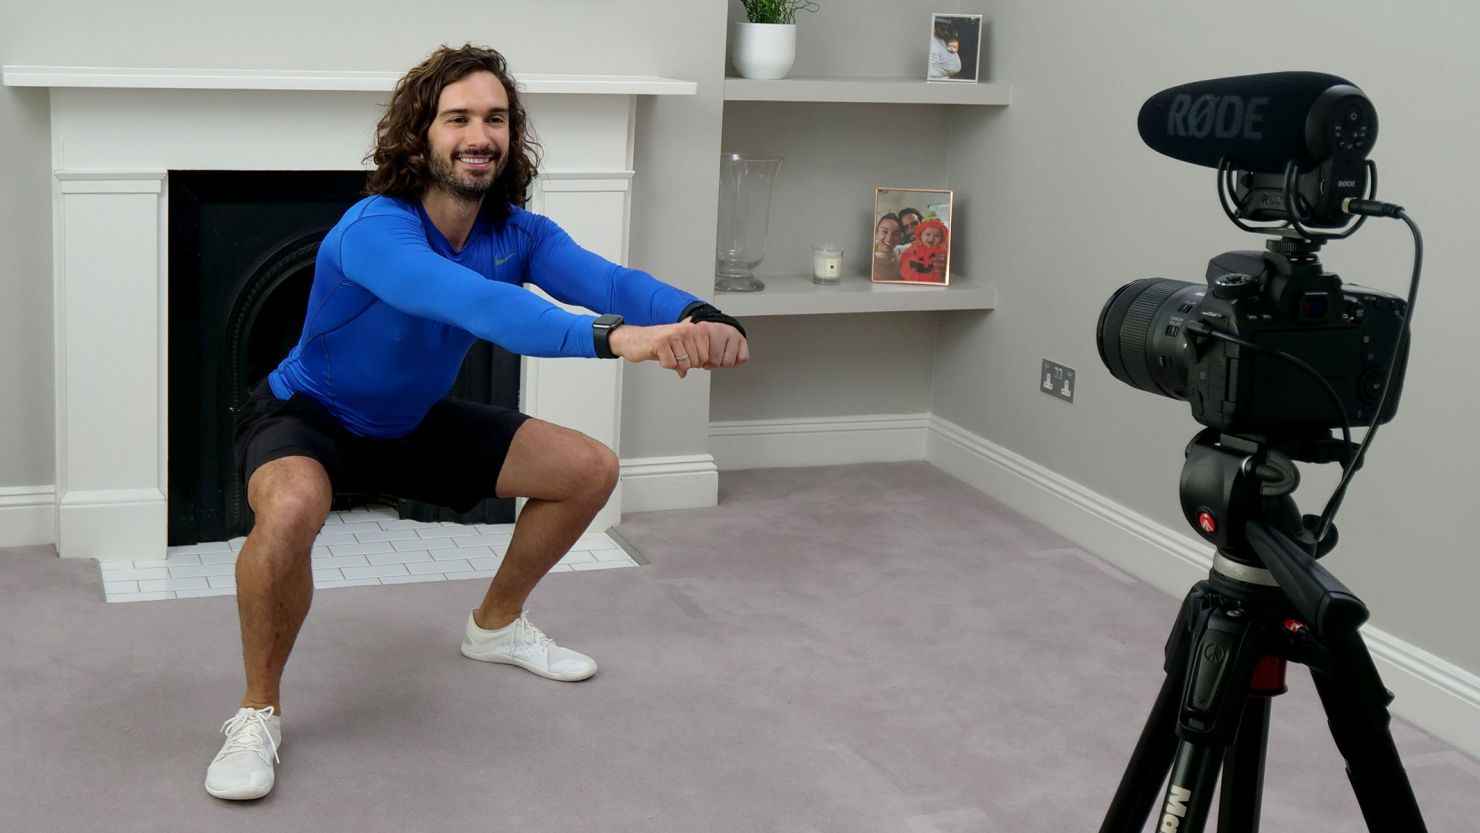 Joe Wicks, aka The Body Coach, will donate advertising revenue from his YouTube PE sessions to the NHS.